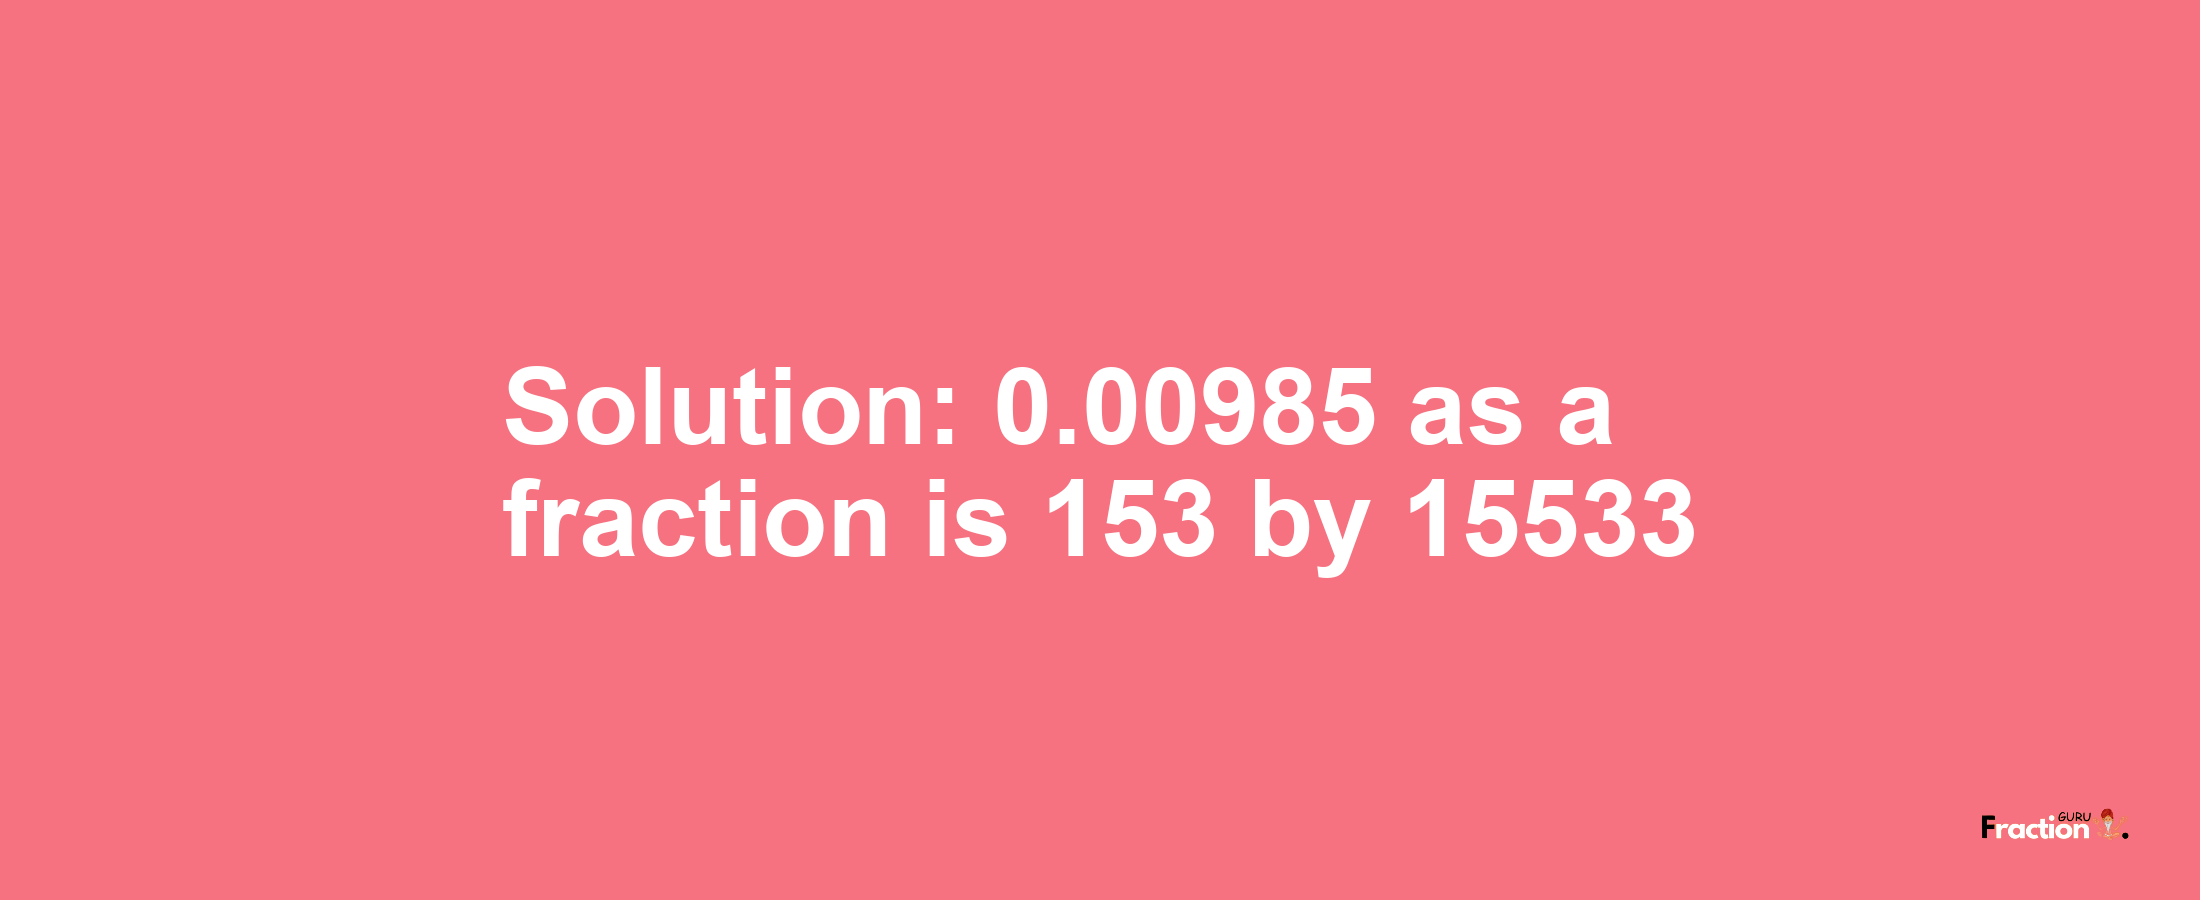 Solution:0.00985 as a fraction is 153/15533